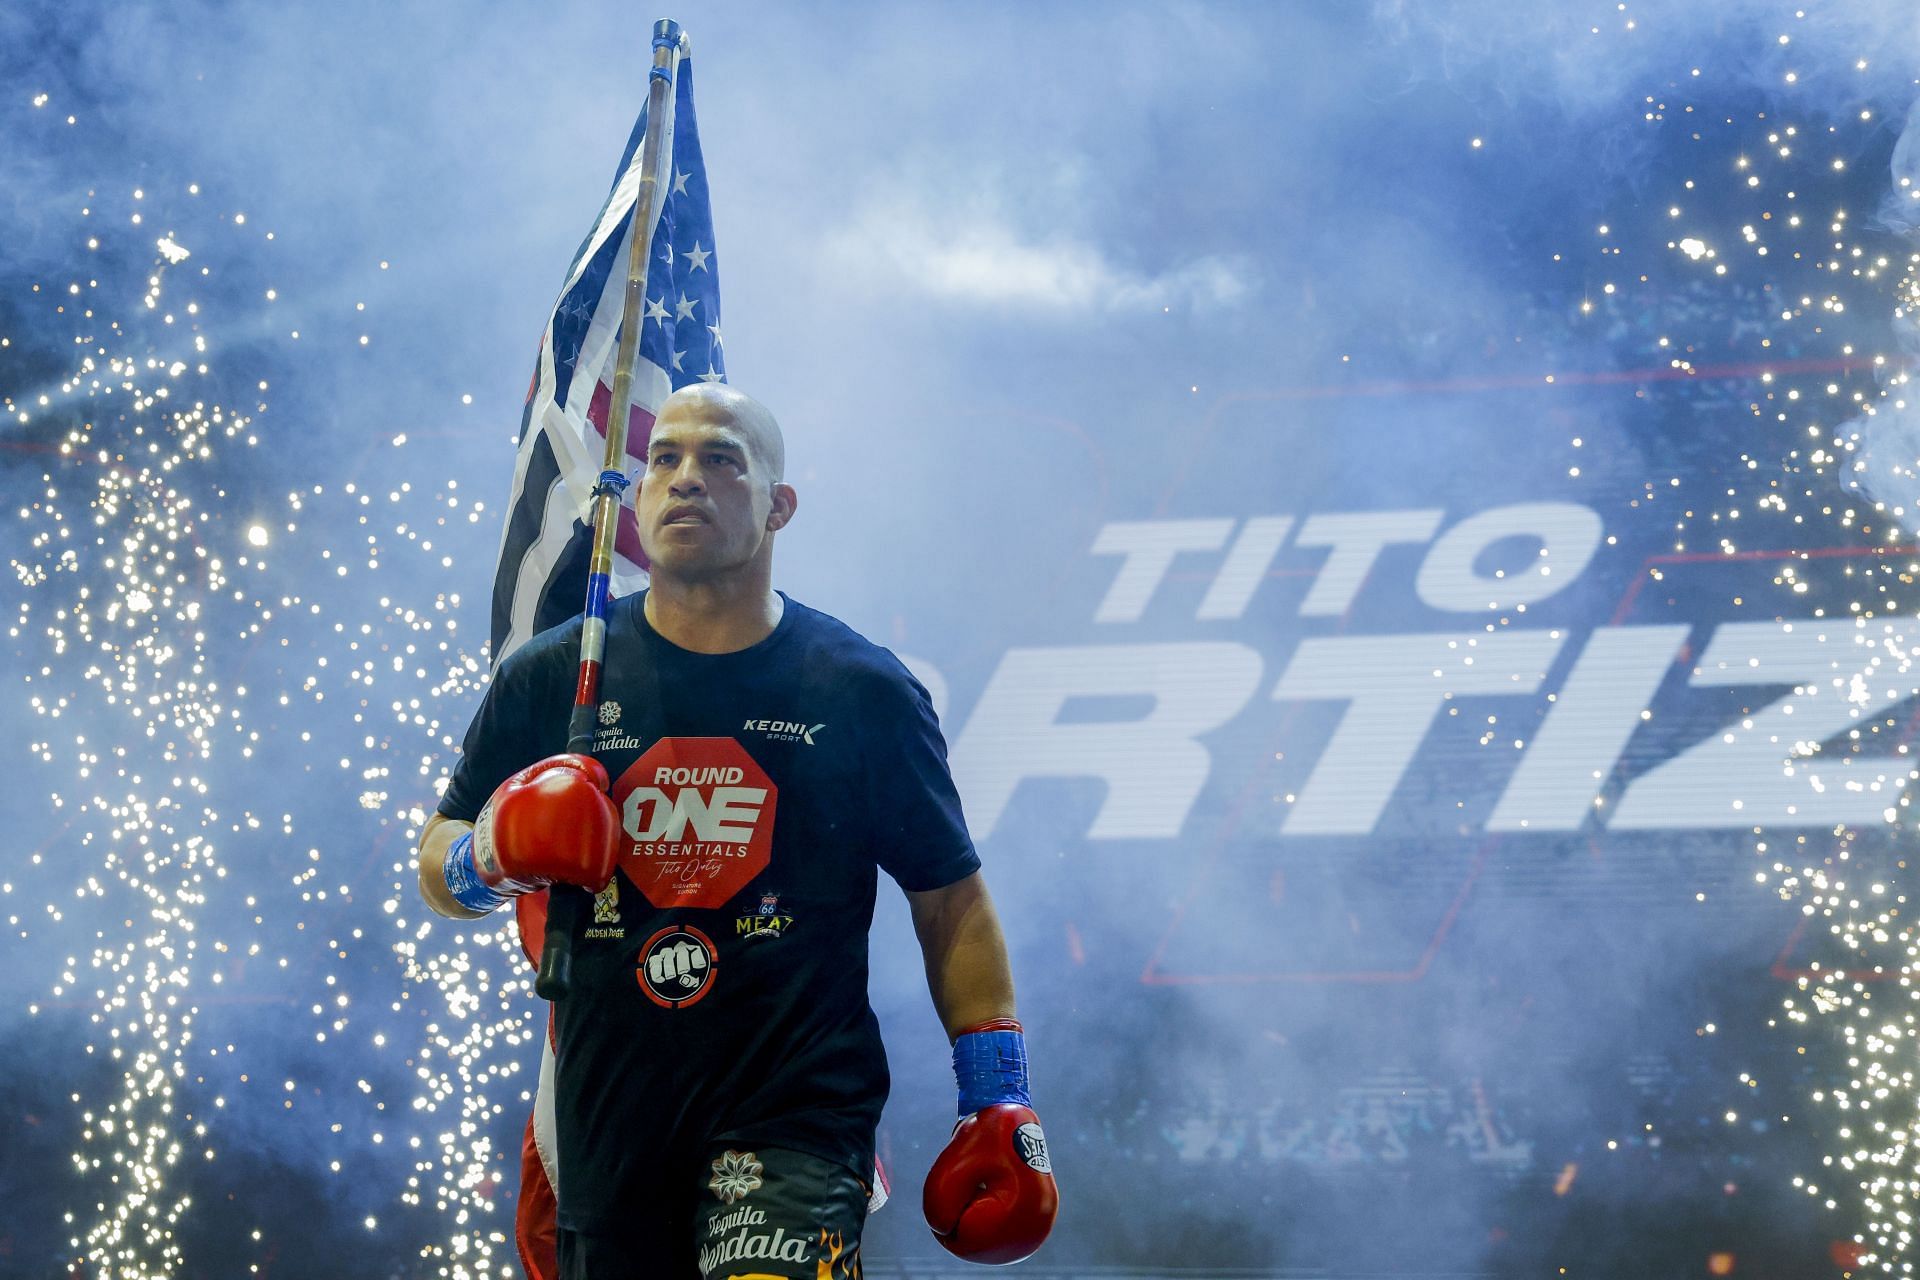 Tito Ortiz found his kryptonite in the form of his former training partner Chuck Liddell